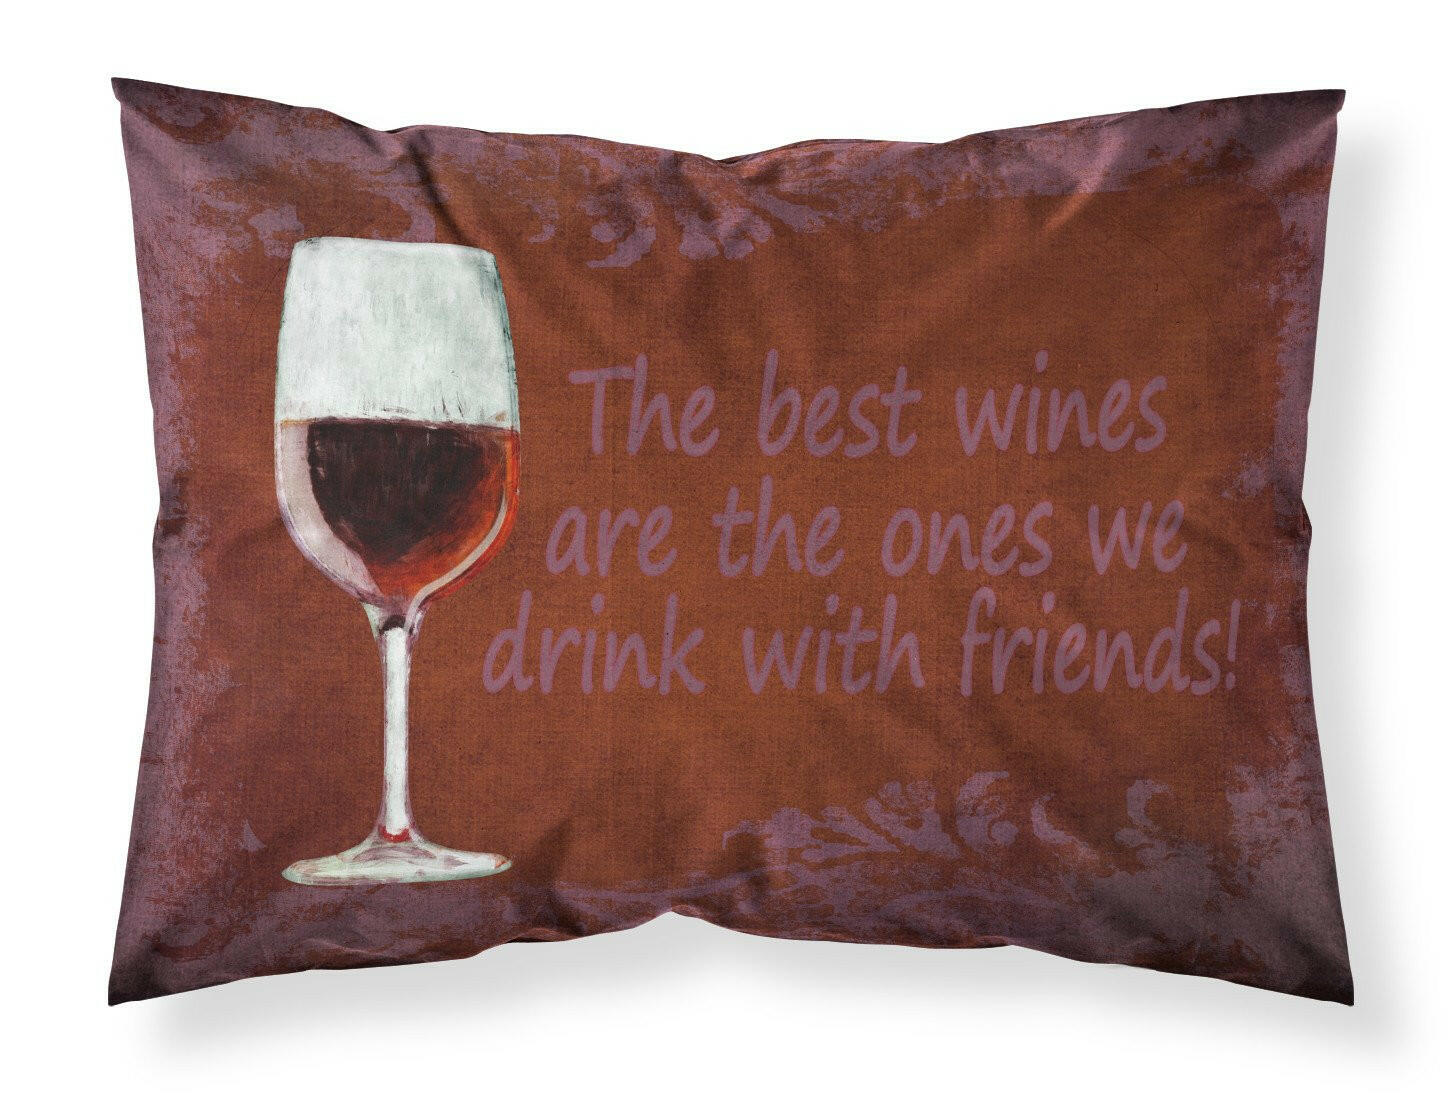 The best wines are the ones we drink with friends Moisture wicking Fabric standard pillowcase SB3068PILLOWCASE by Caroline's Treasures